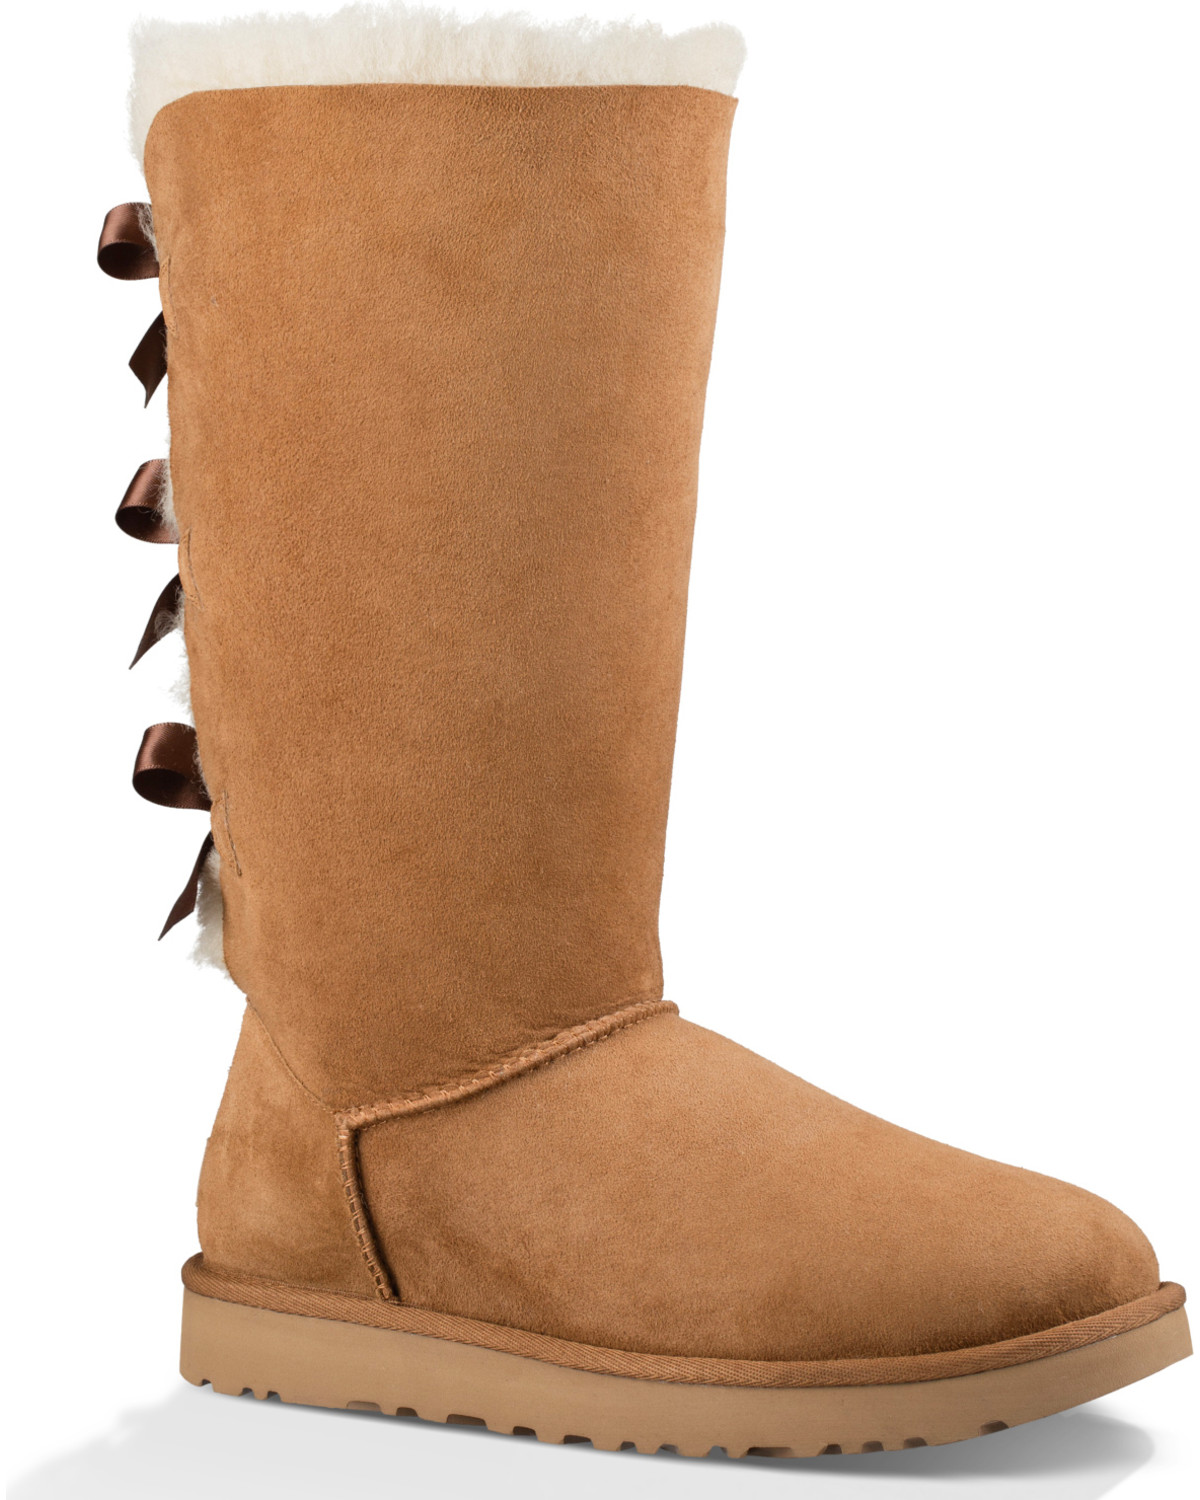 UGG Women's Chestnut Bailey Bow Tall II Boots - Round Toe